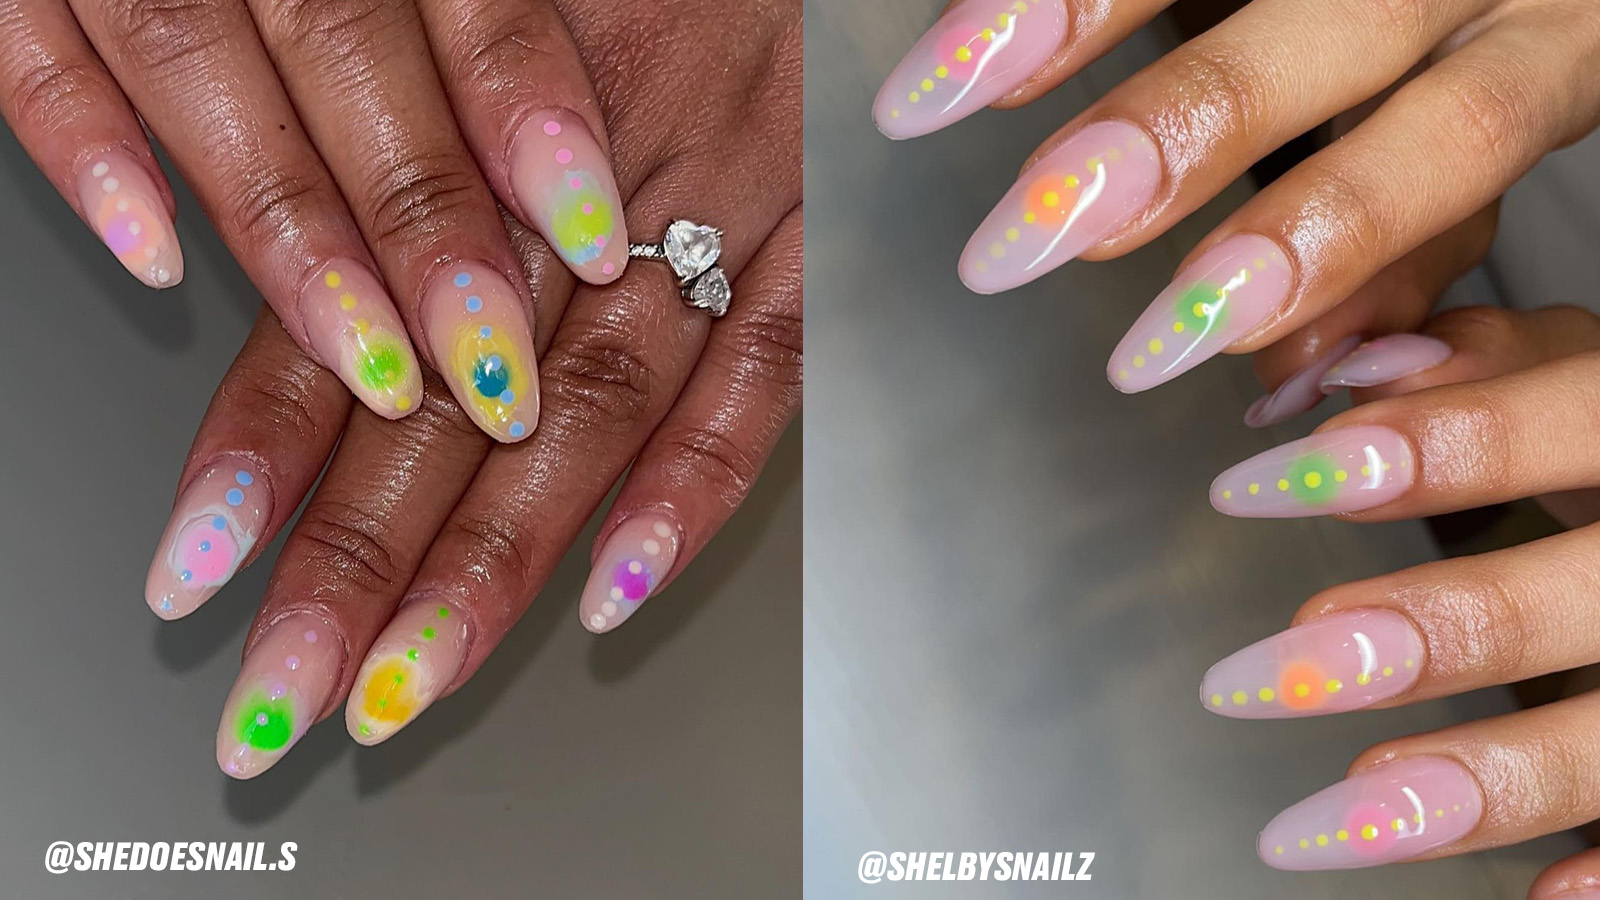 20 Ways To Try Summer 2022's Aura Nails Trend - Beauty Bay Edited